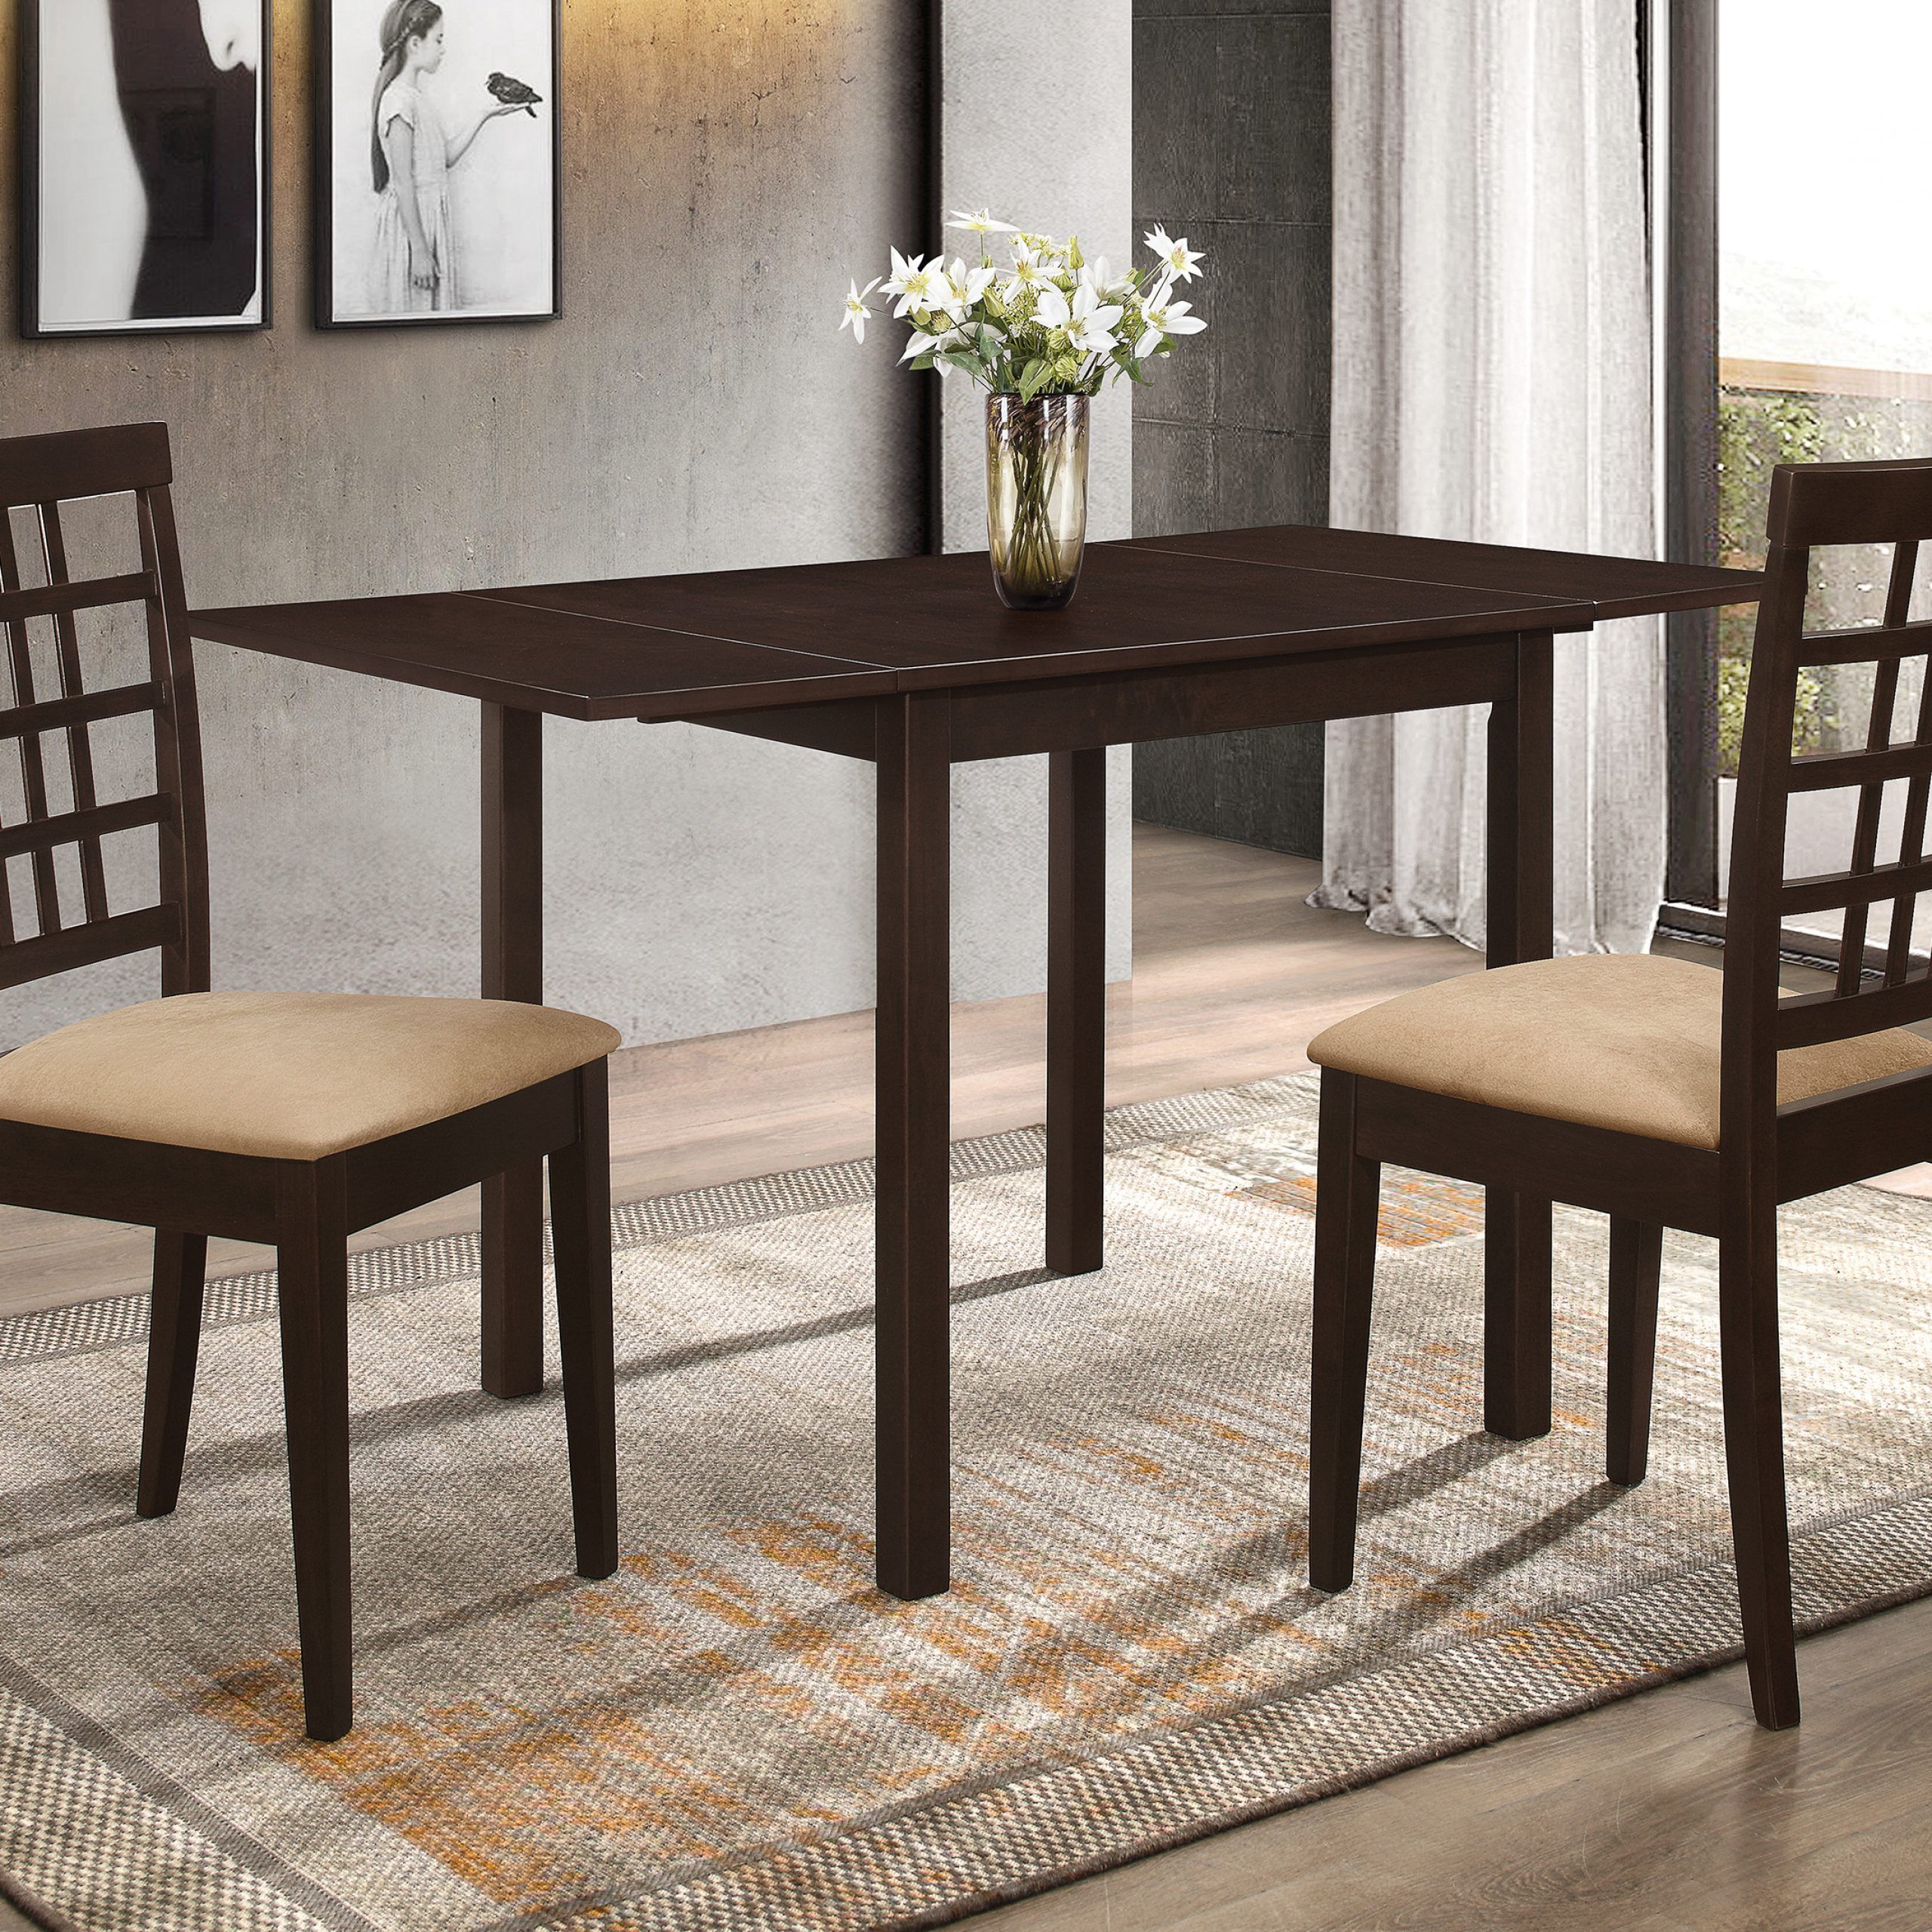 Preferred Transitional 4 Seating Drop Leaf Casual Dining Tables With Regard To Kelso Rectangular Dining Table With Drop Leaf Cappuccino (View 5 of 30)